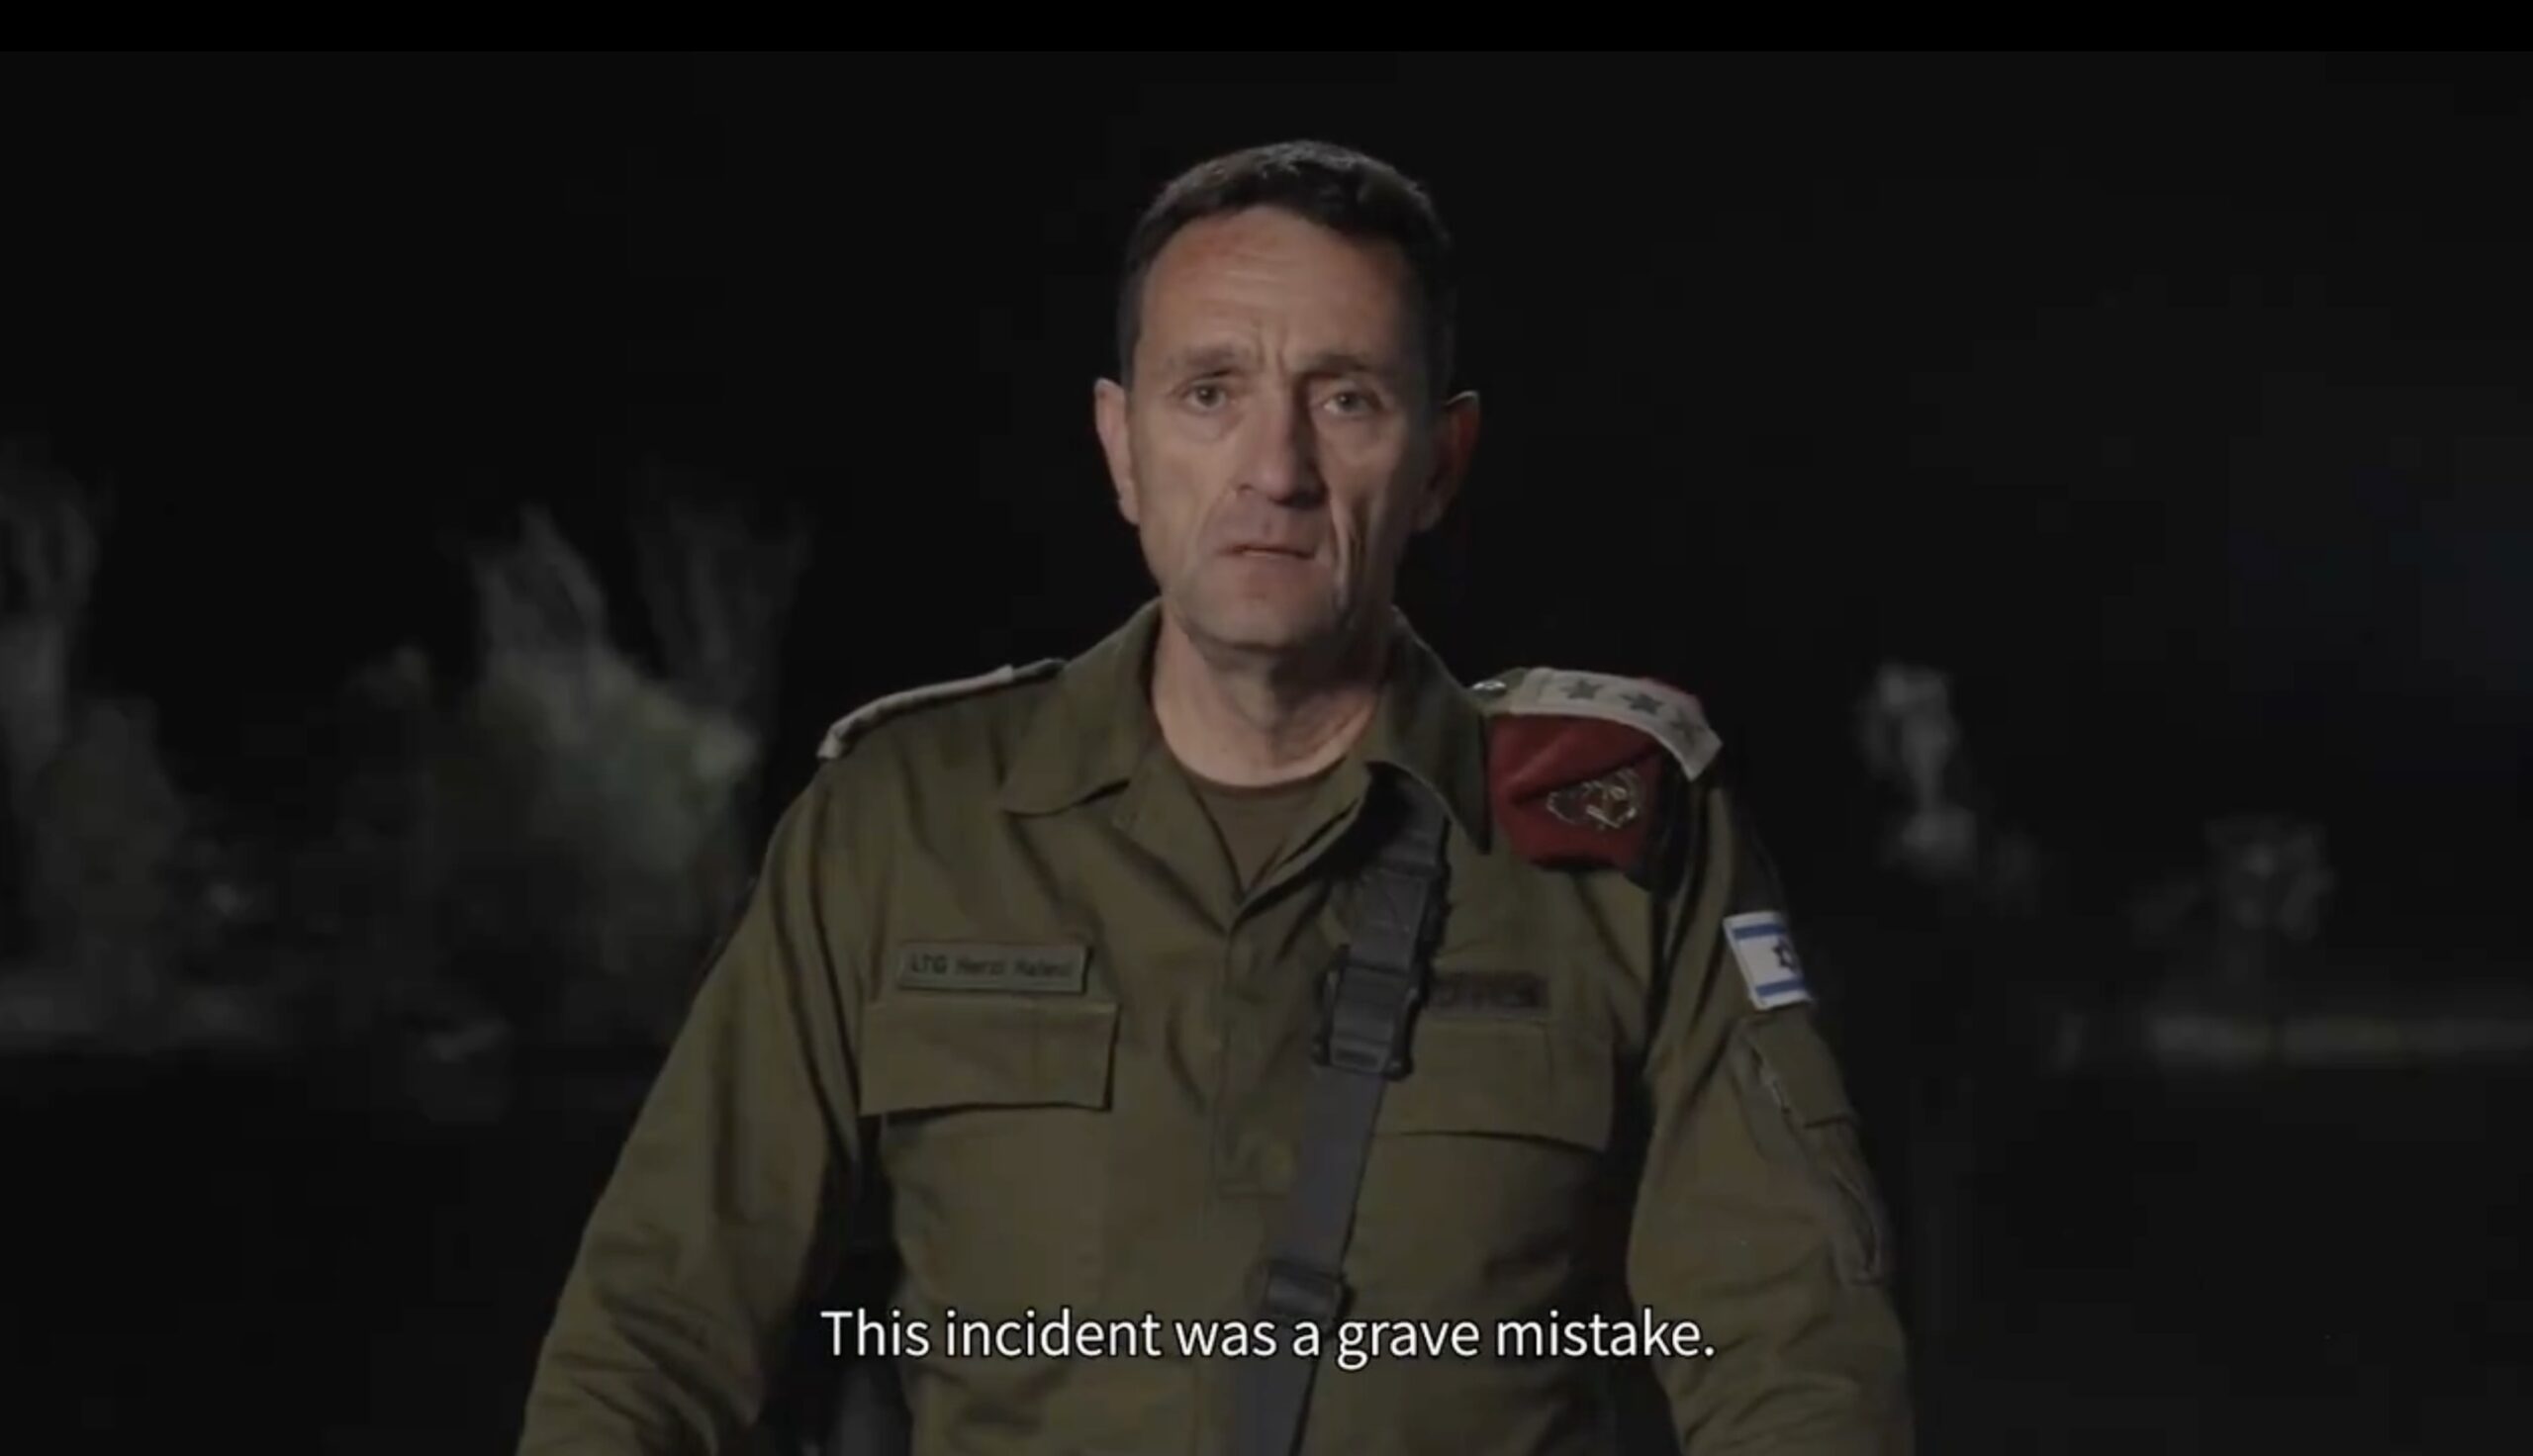 IDF Chief Apologizes for Airstrike That Killed Seven Aid Workers: ‘This Incident Was a Grave Mistake’